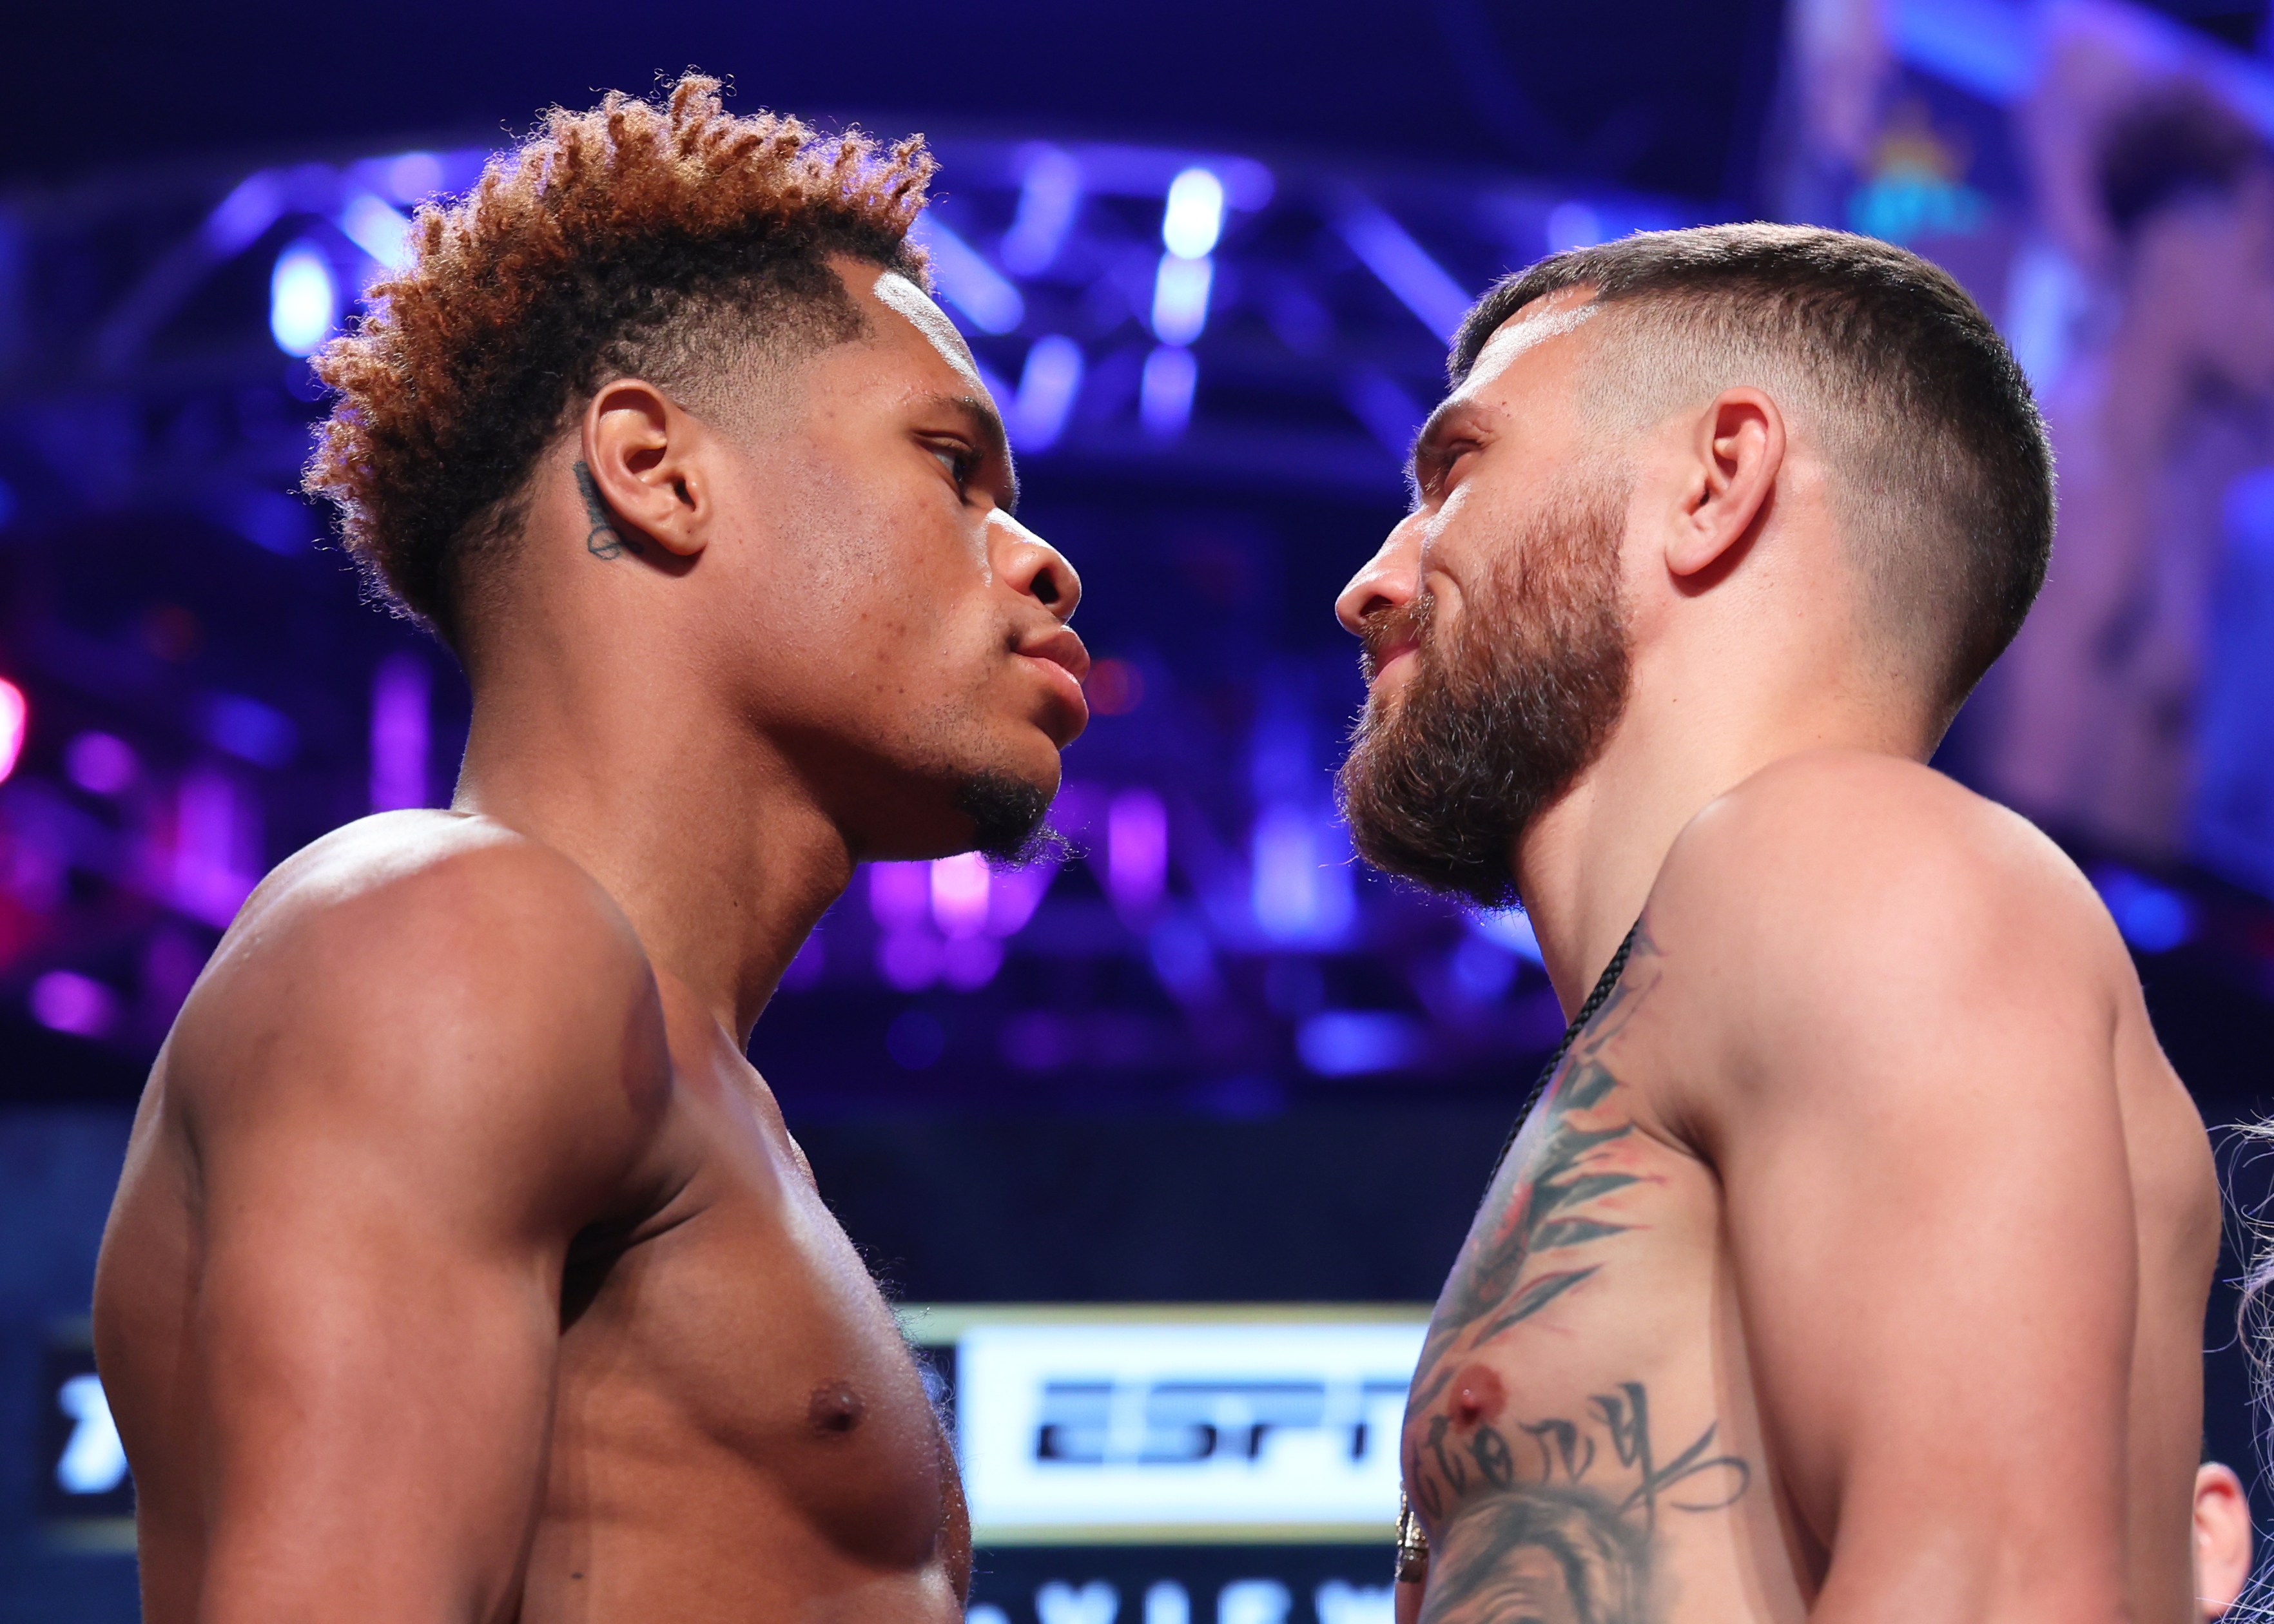 Devin Haney and Vasiliy Lomachenko meet for undisputed glory tonight on PPV